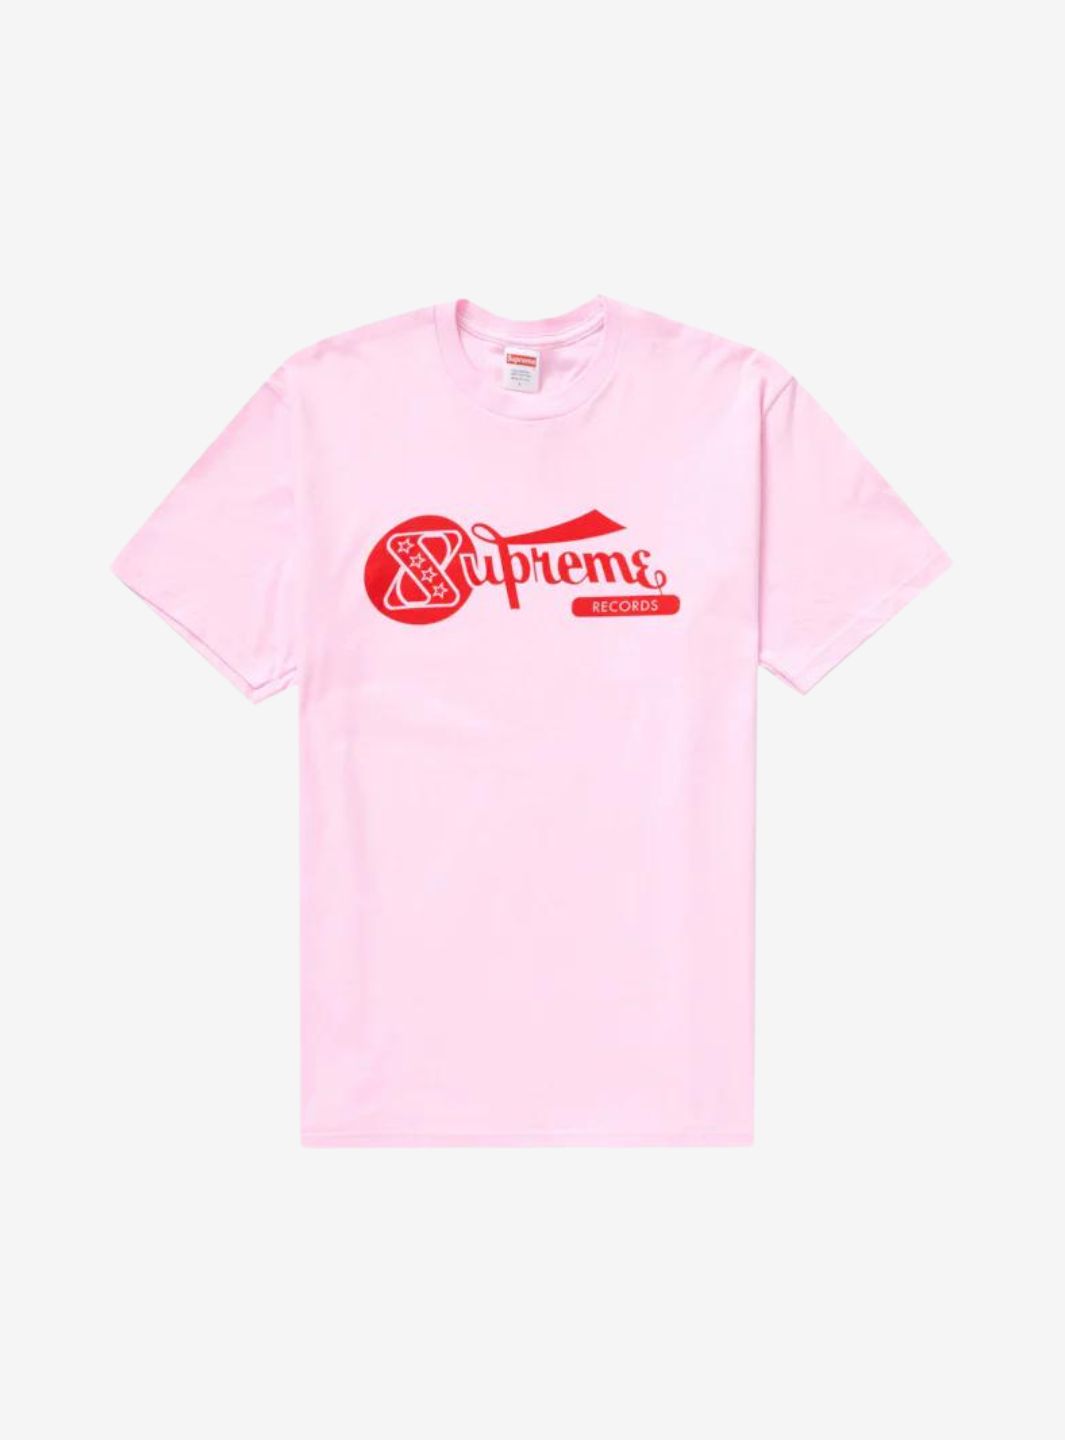 Supreme Records T-Shirt Light Pink | ResellZone